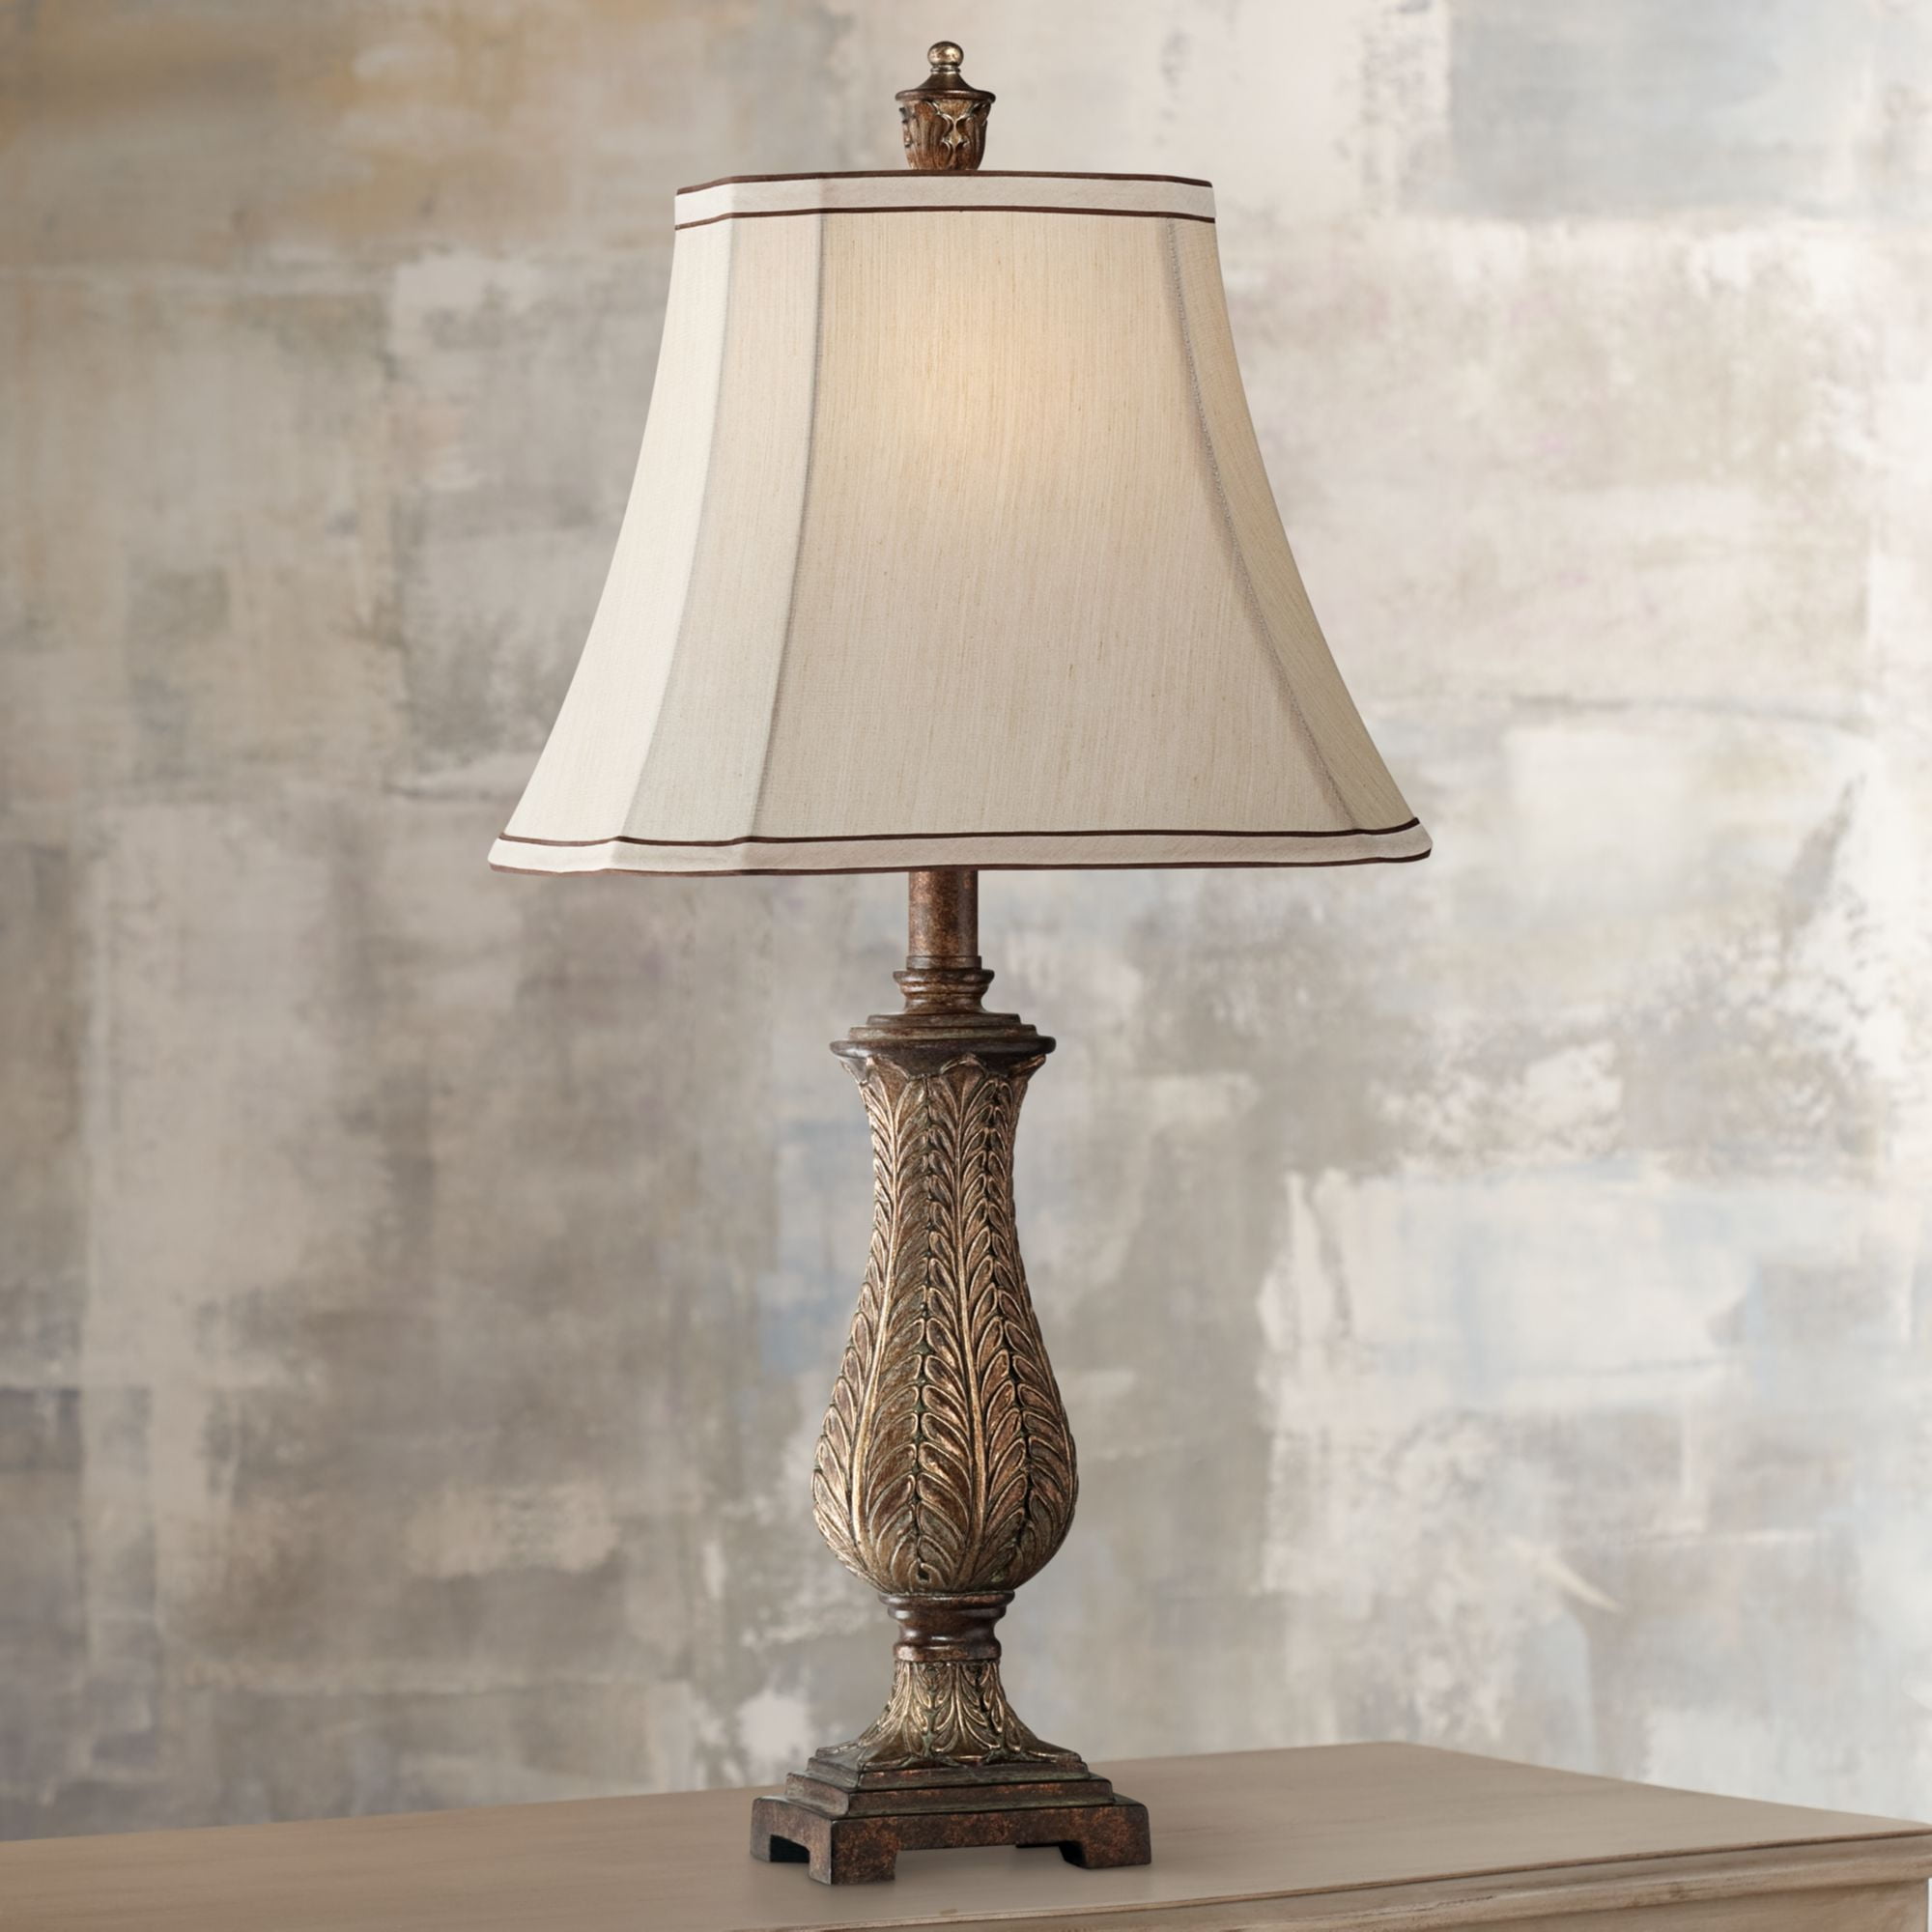 Regency Hill Traditional Table Lamp Old, Vase Table Lamps For Living Room